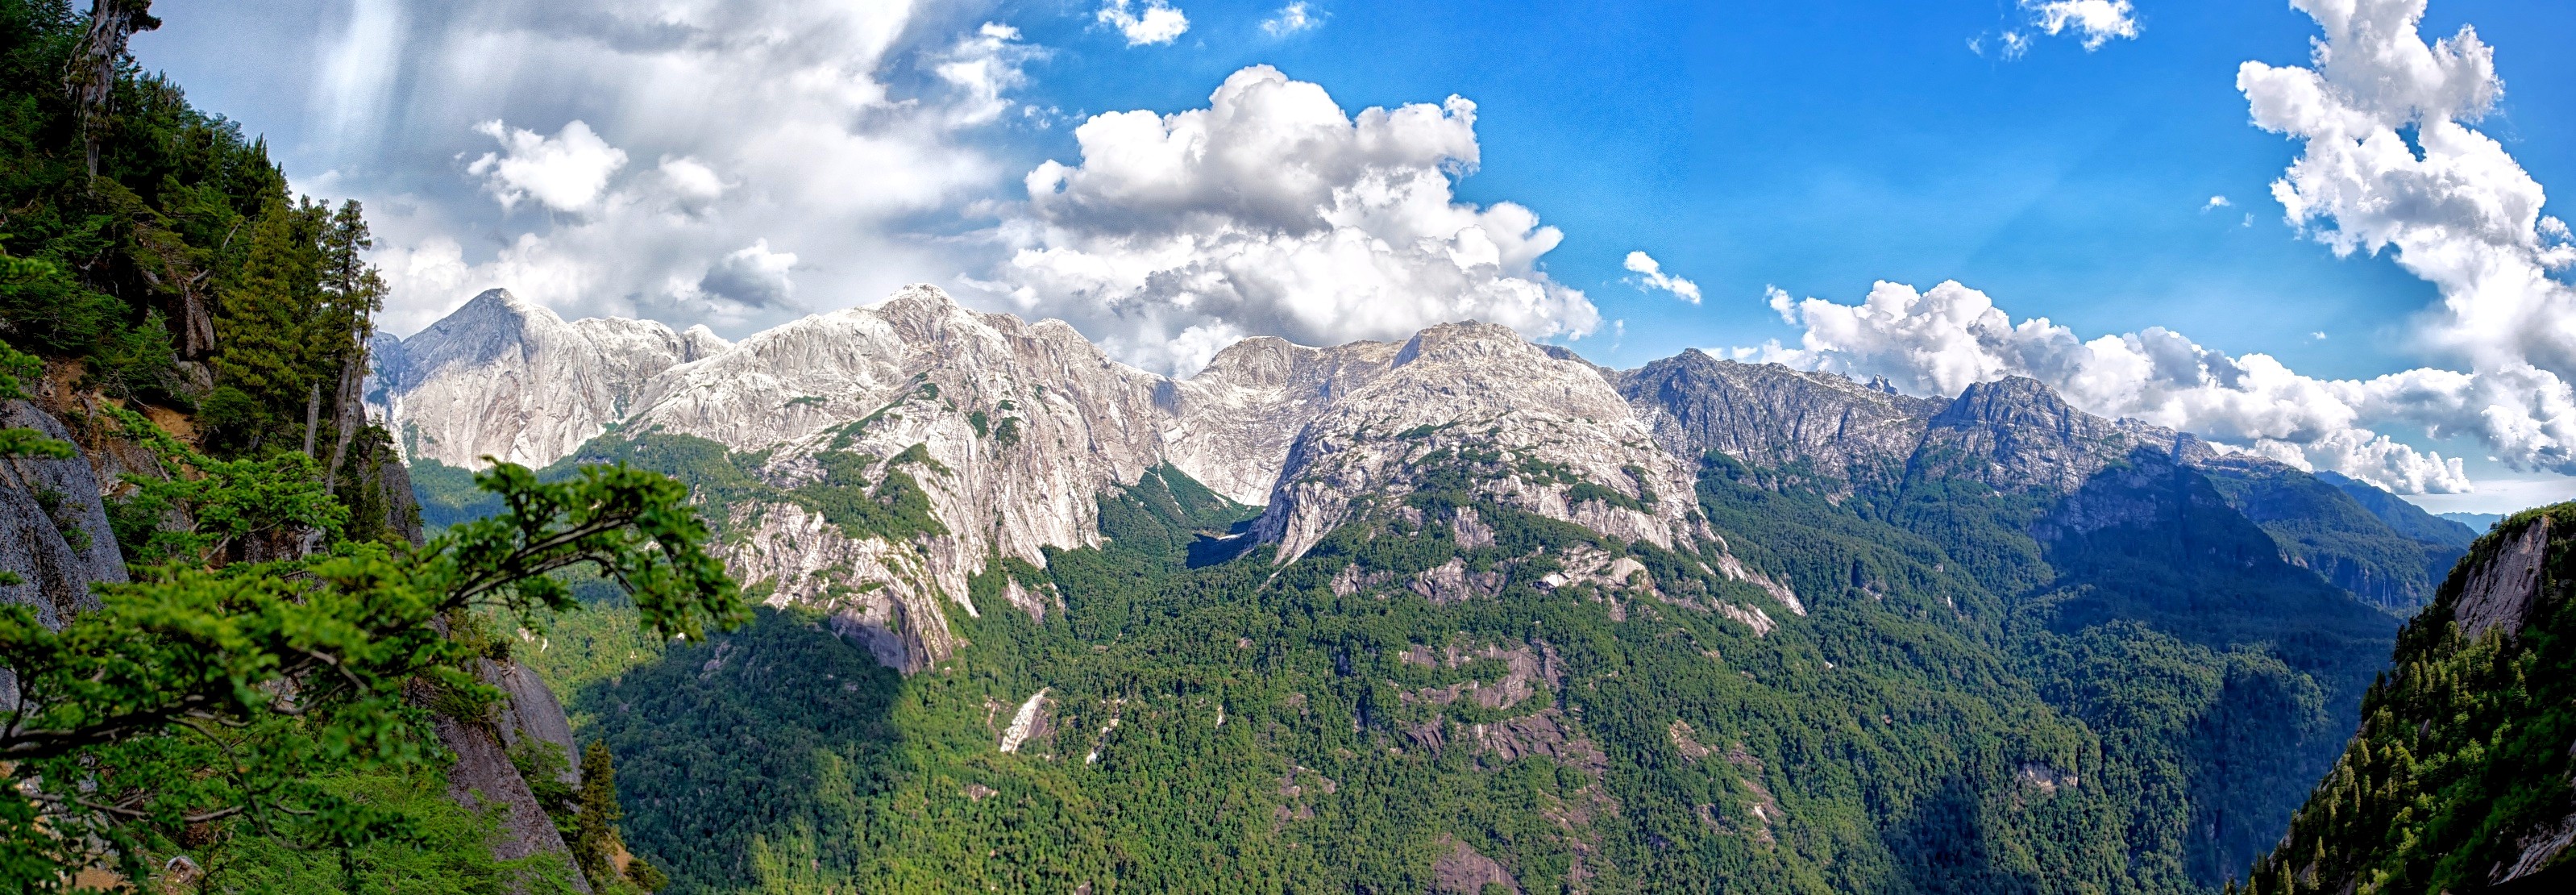 General 3196x1110 mountains panorama forest Chile valley cliff summer nature landscape South America